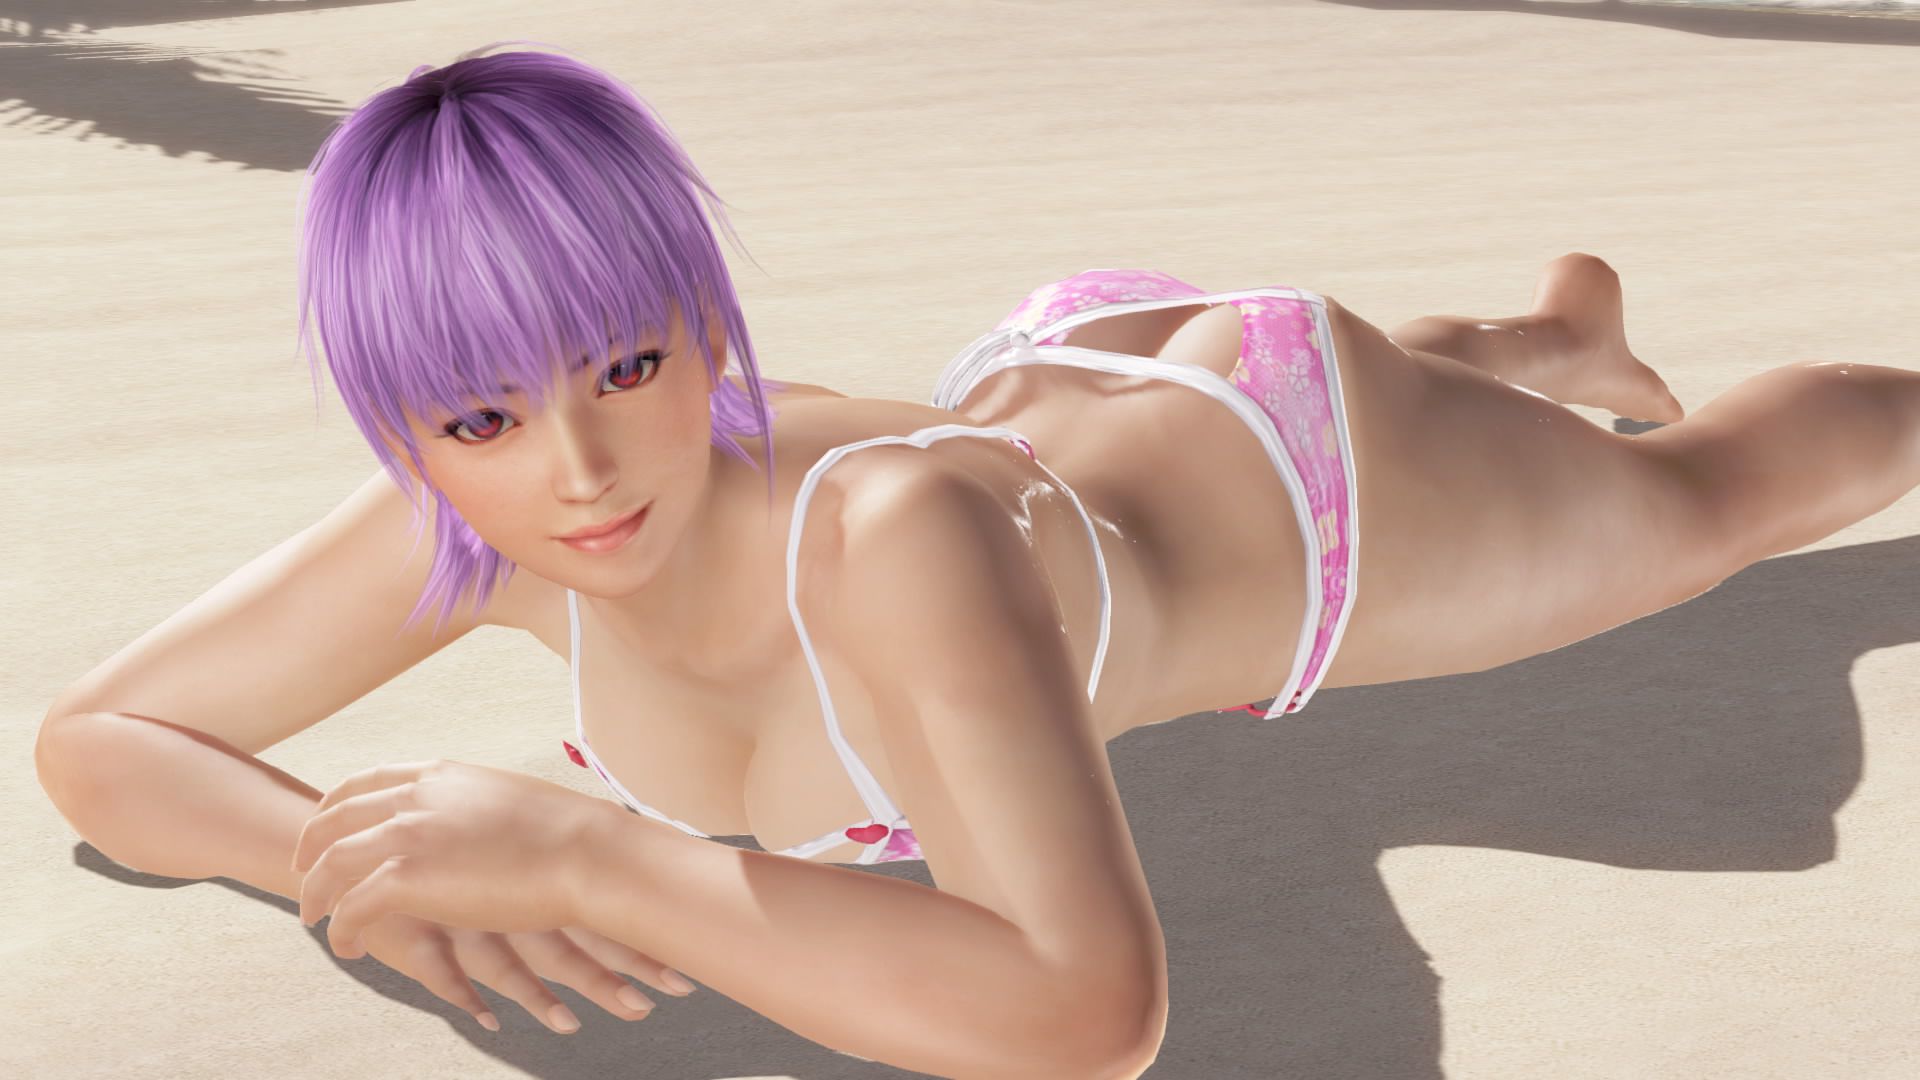 Doax3 "The color which suits the Aya-chan is pink" theory is verified 17